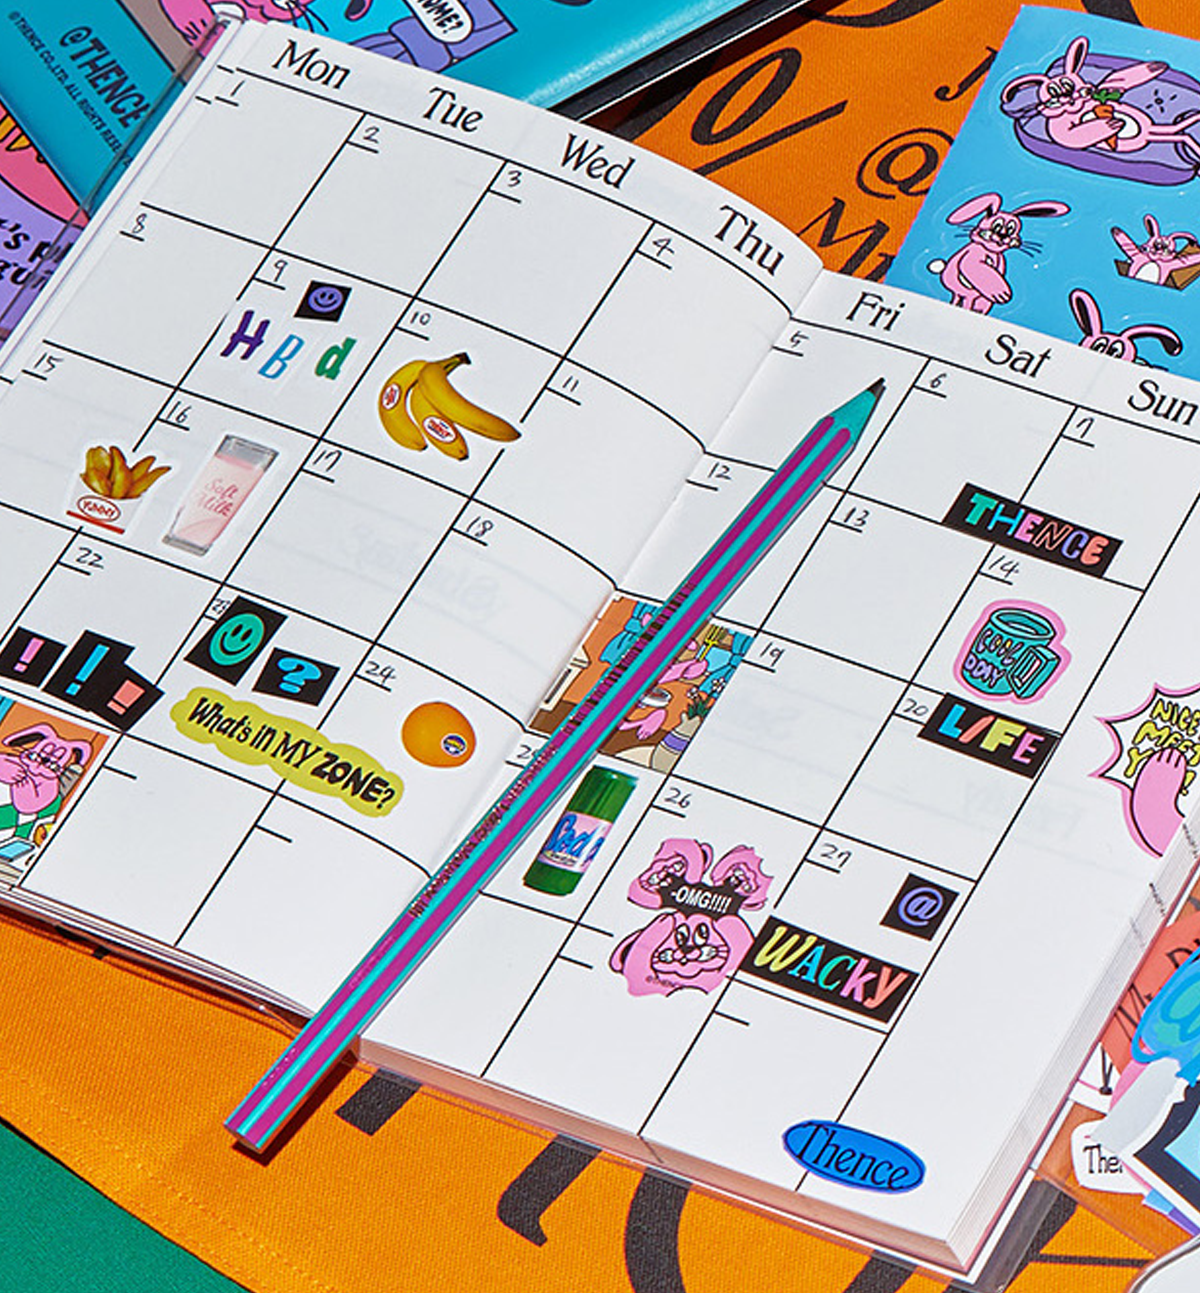 My Wacky Wise Life Weekly Planner